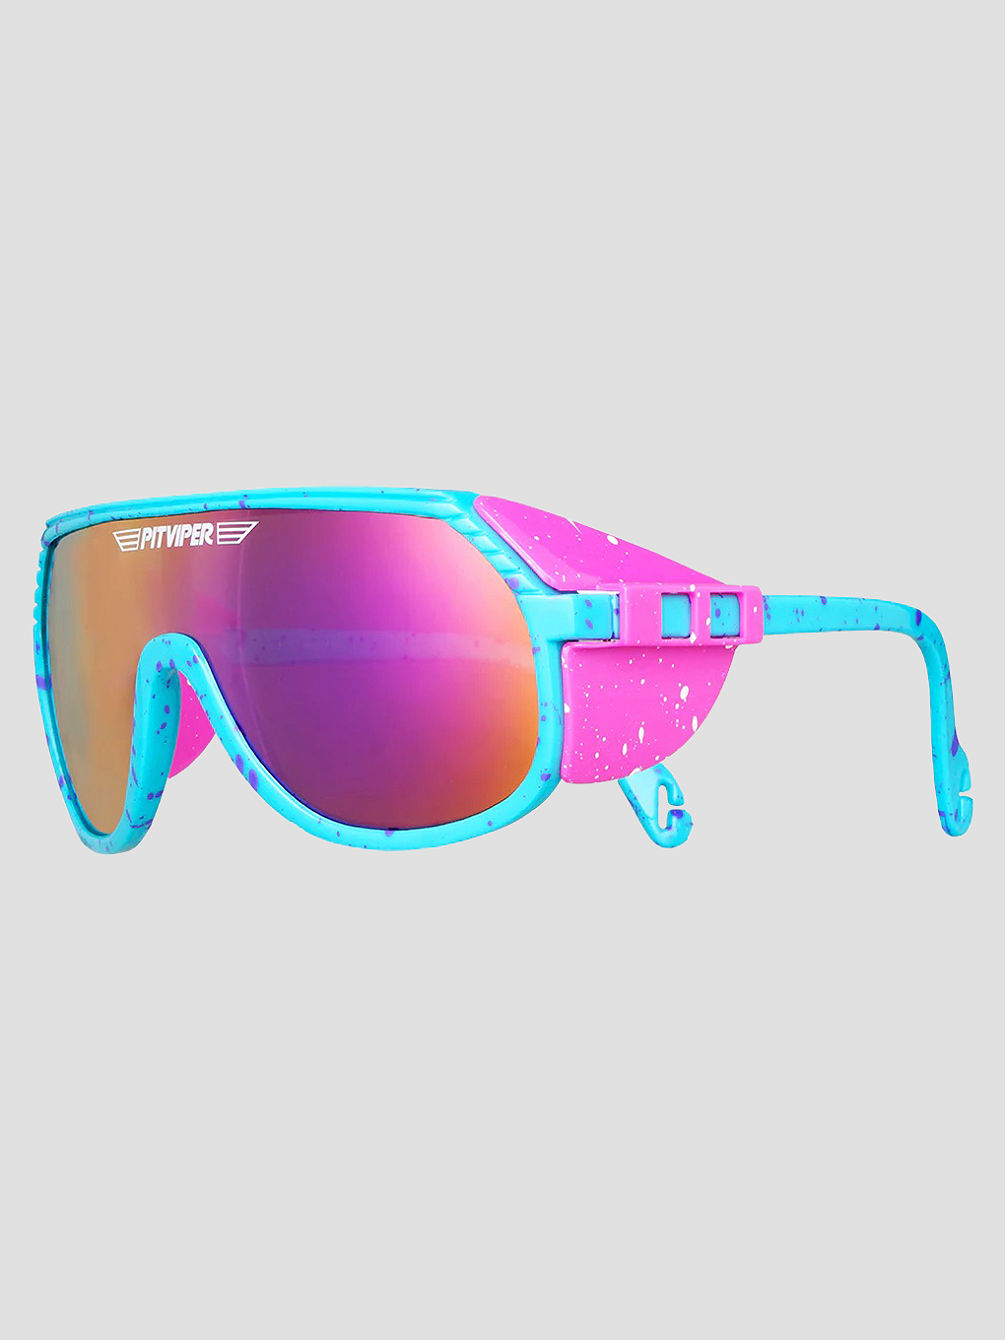 The Grand Prix Wind Surfing Okulary